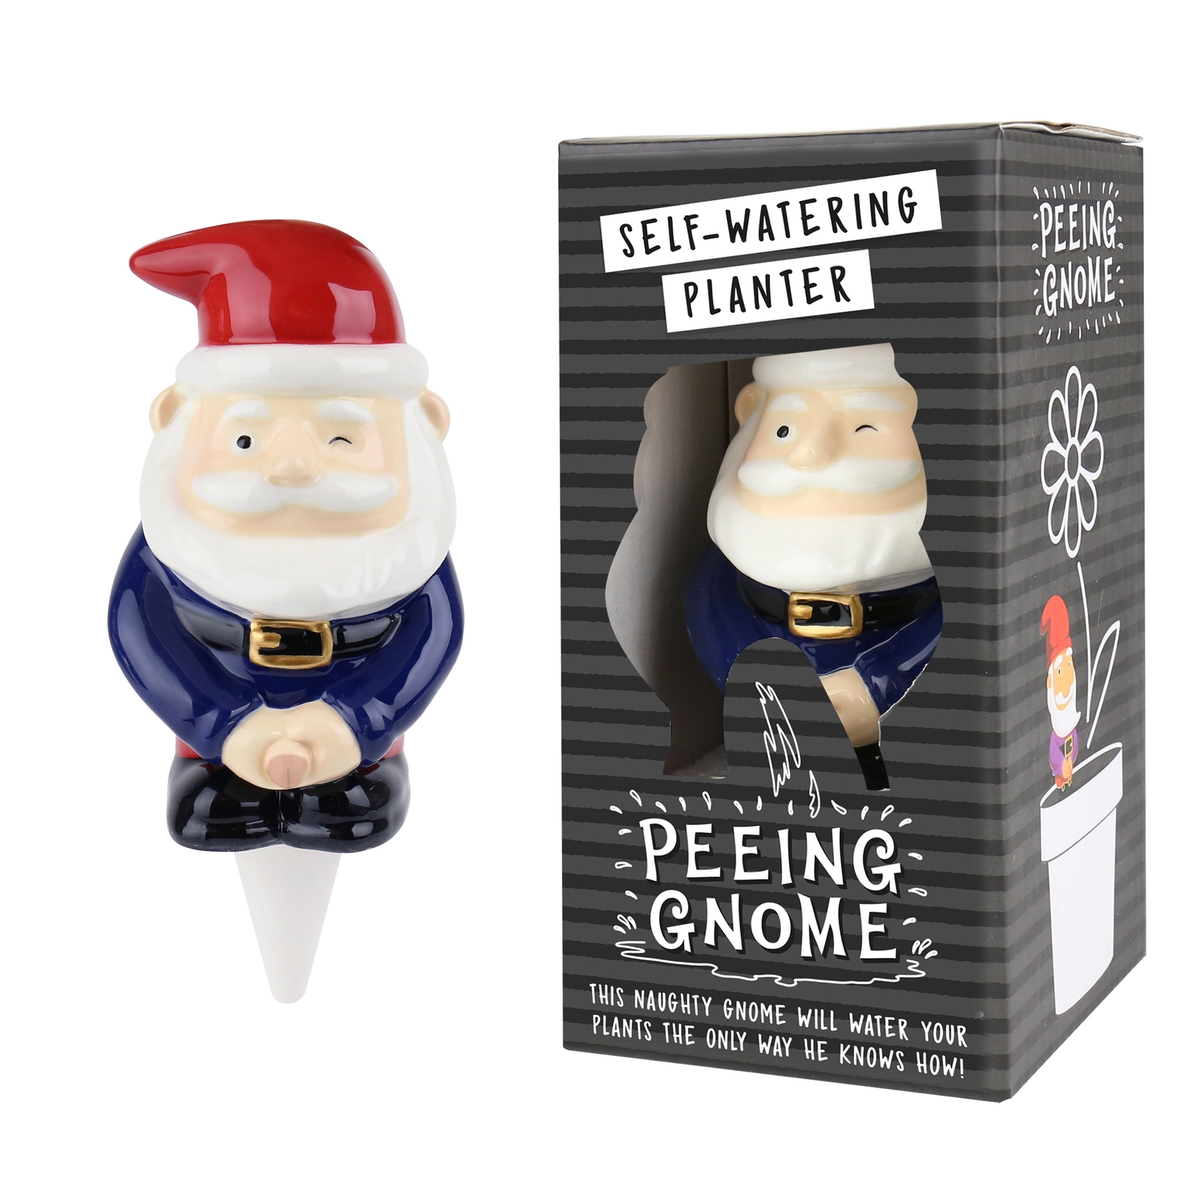 The Peeing Gnome Self Watering Planter